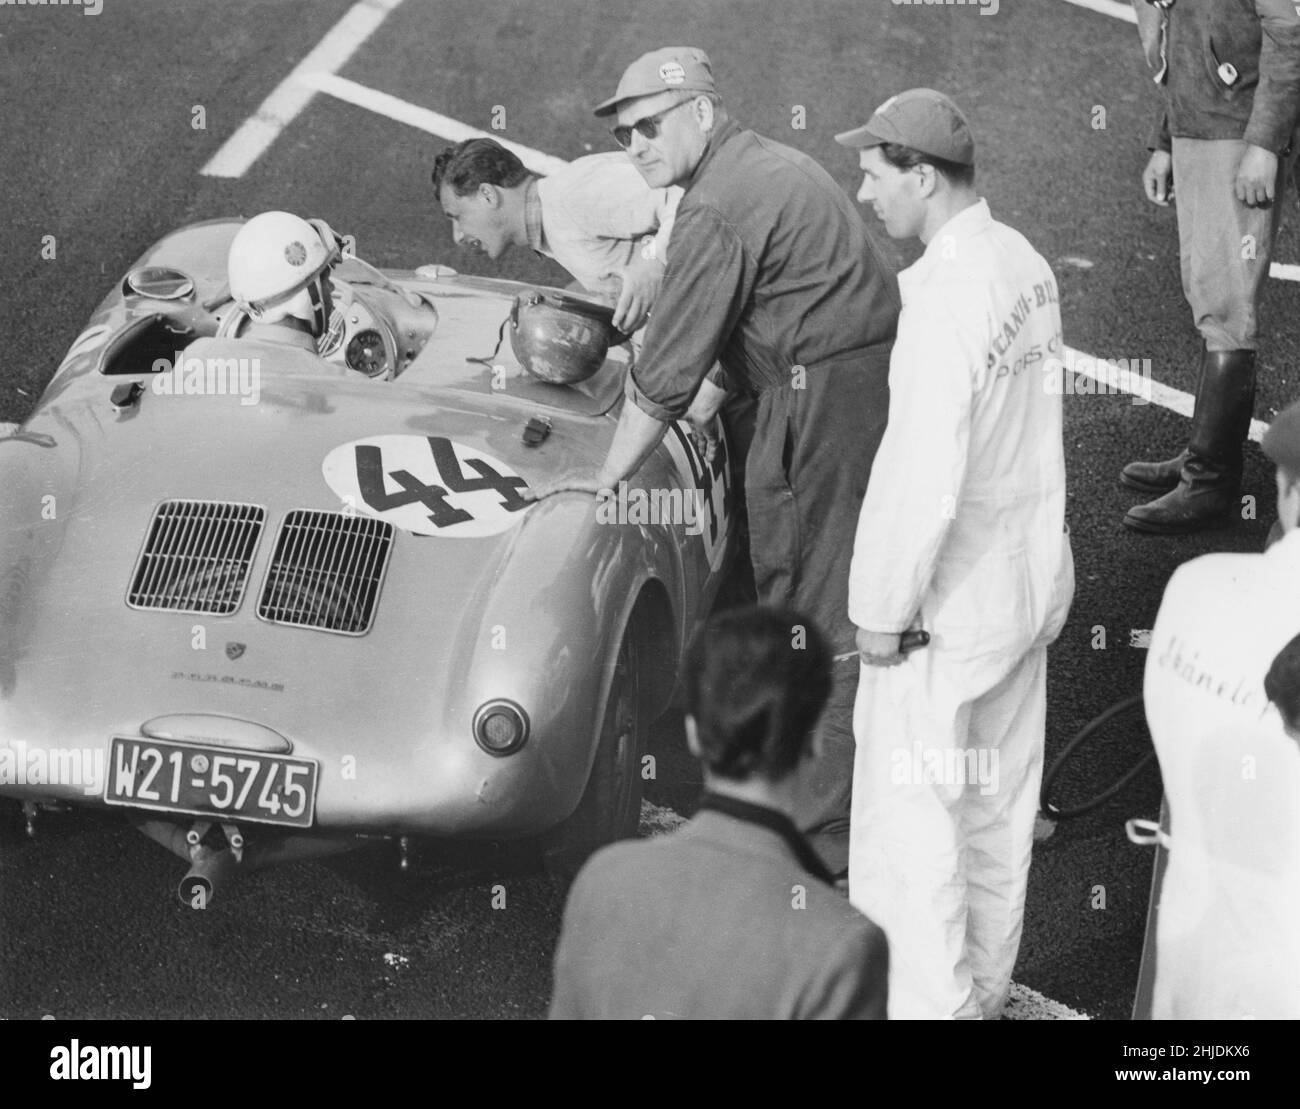 Racing car of the 1950s. The german race car driver Gert Kaiser is pictured in his Porsche 330 spyder during the swedish grand prix that was held in Kristianstad 1958. The man leaning to speak with him is Hans Herrmann, also a famous racingdriver. Stock Photo